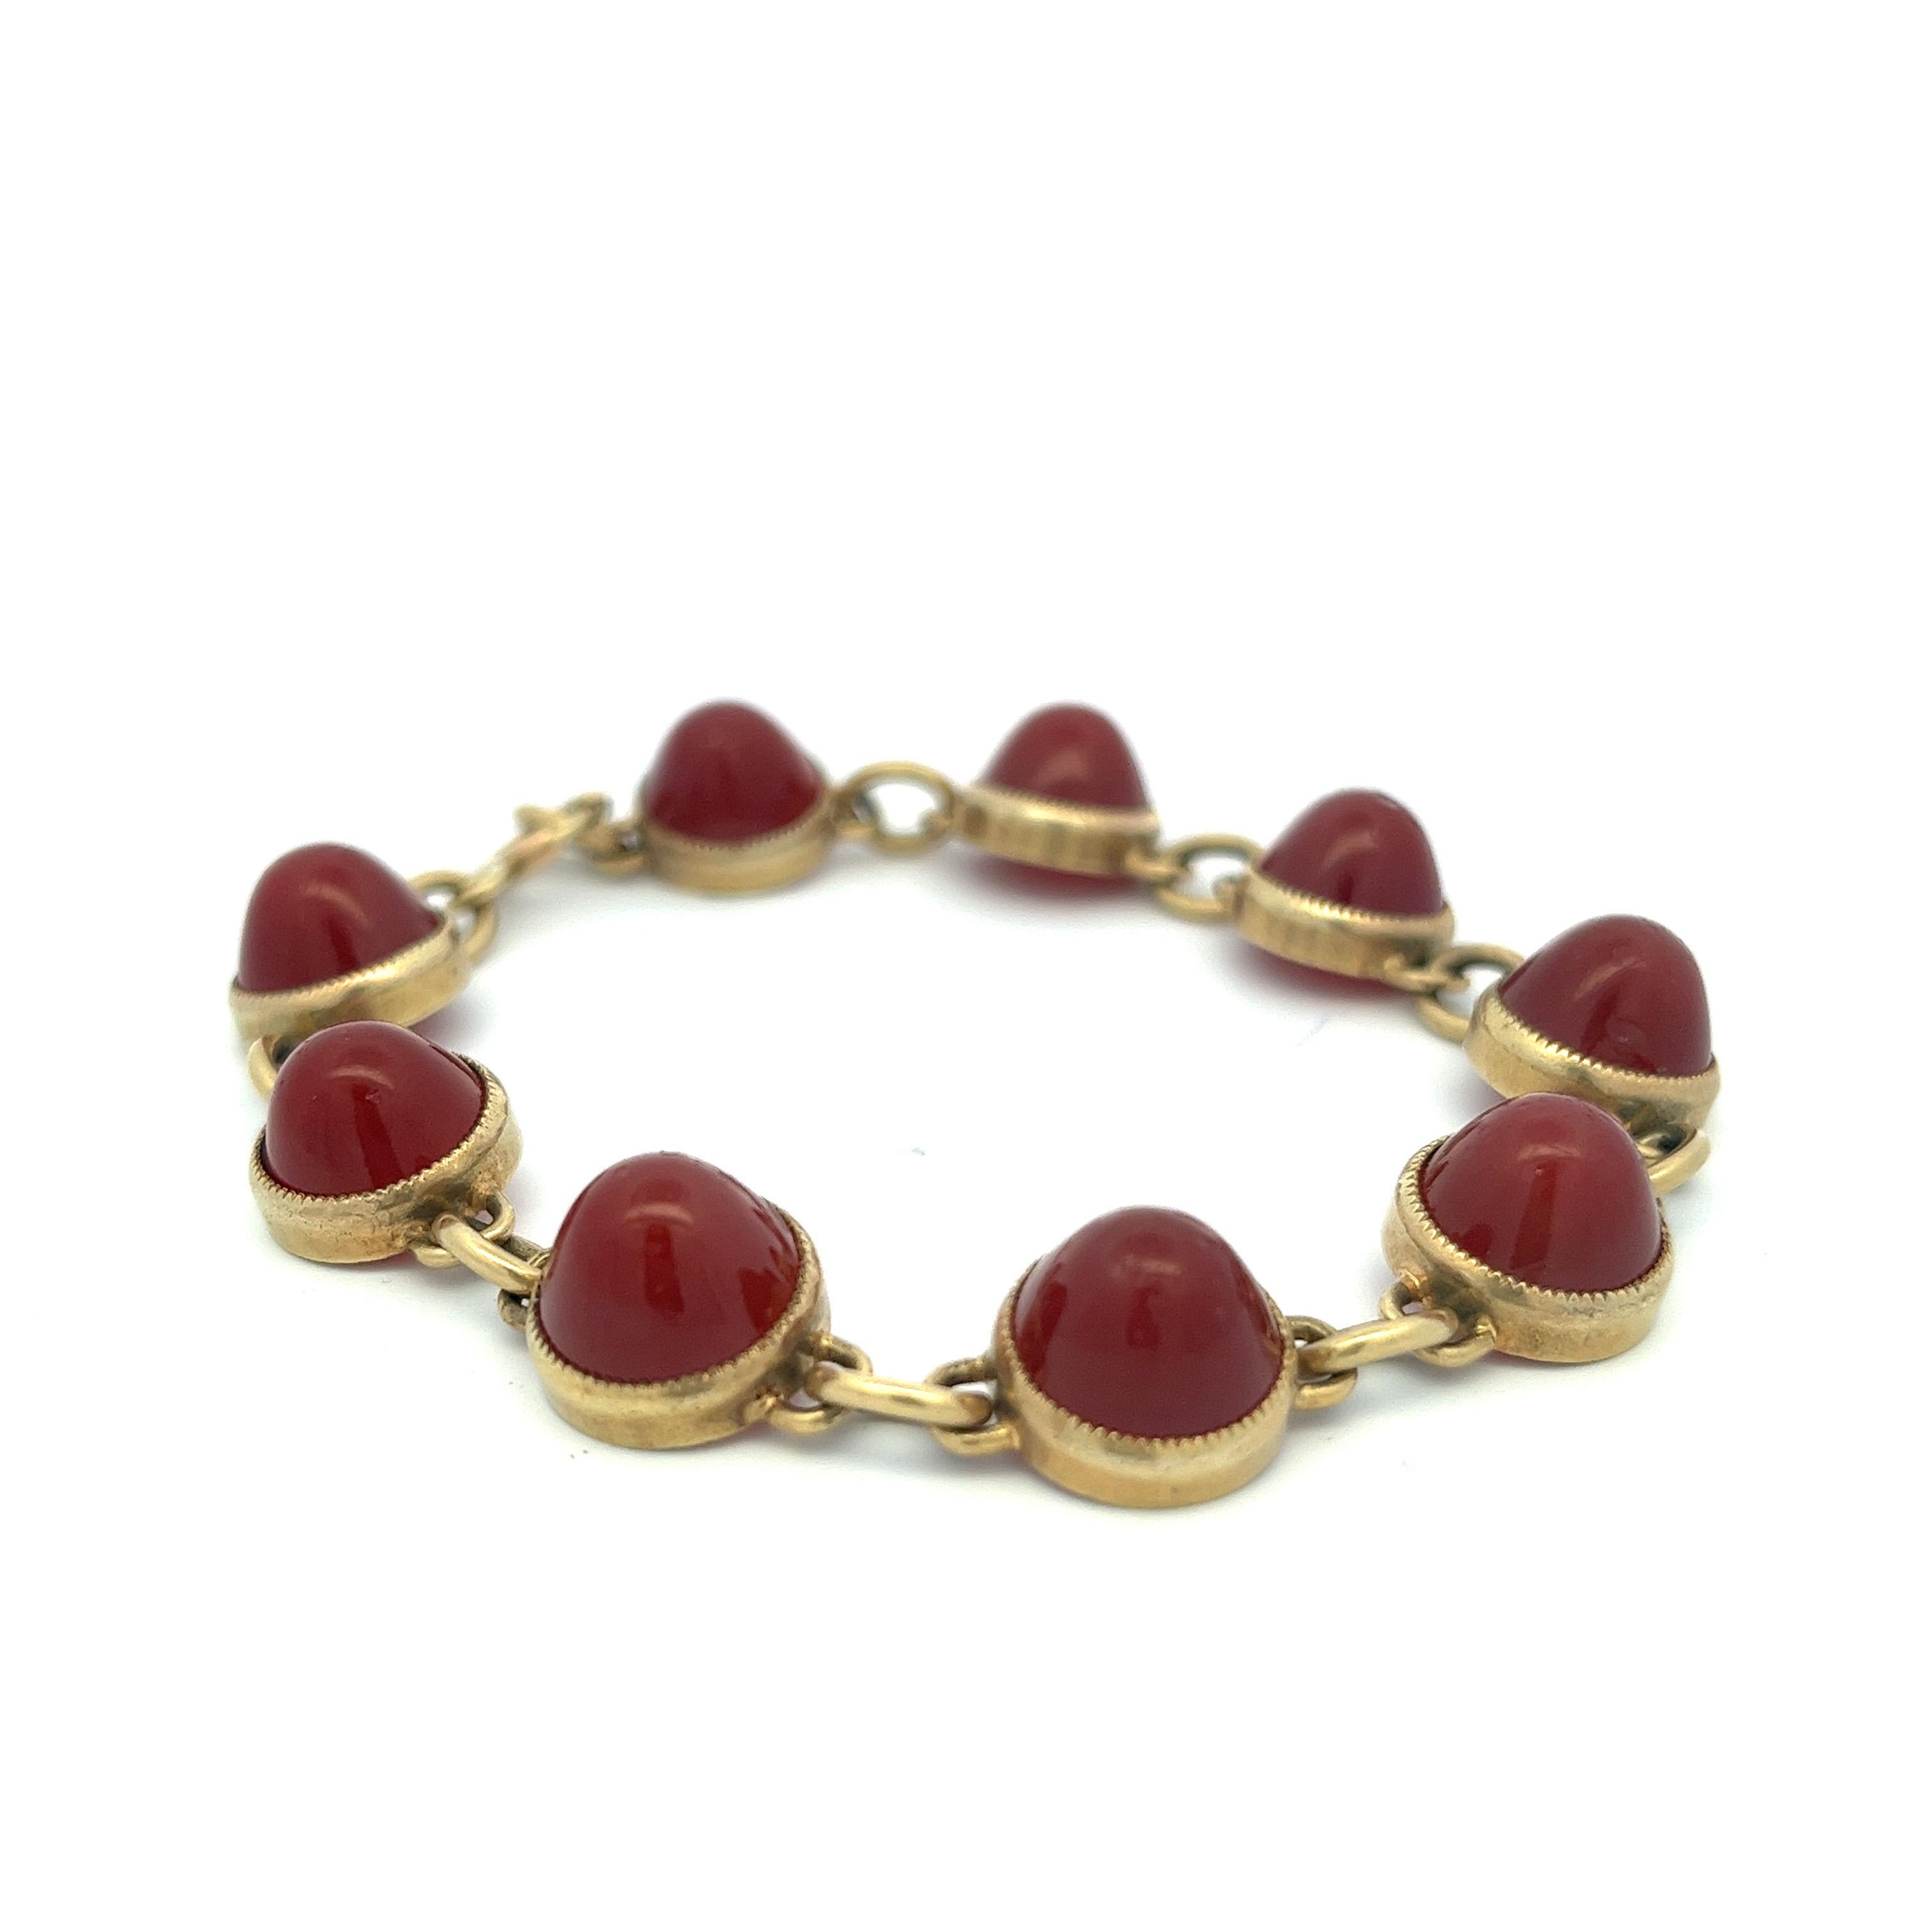 This exquisite bracelet showcases a sequence of nine carnelian cabochons, each featuring a sugarloaf cut that resembles elegant gumdrops adorning the wrist. The cabochons are meticulously bezel-set, harmoniously linked by 14-karat gold chains with a